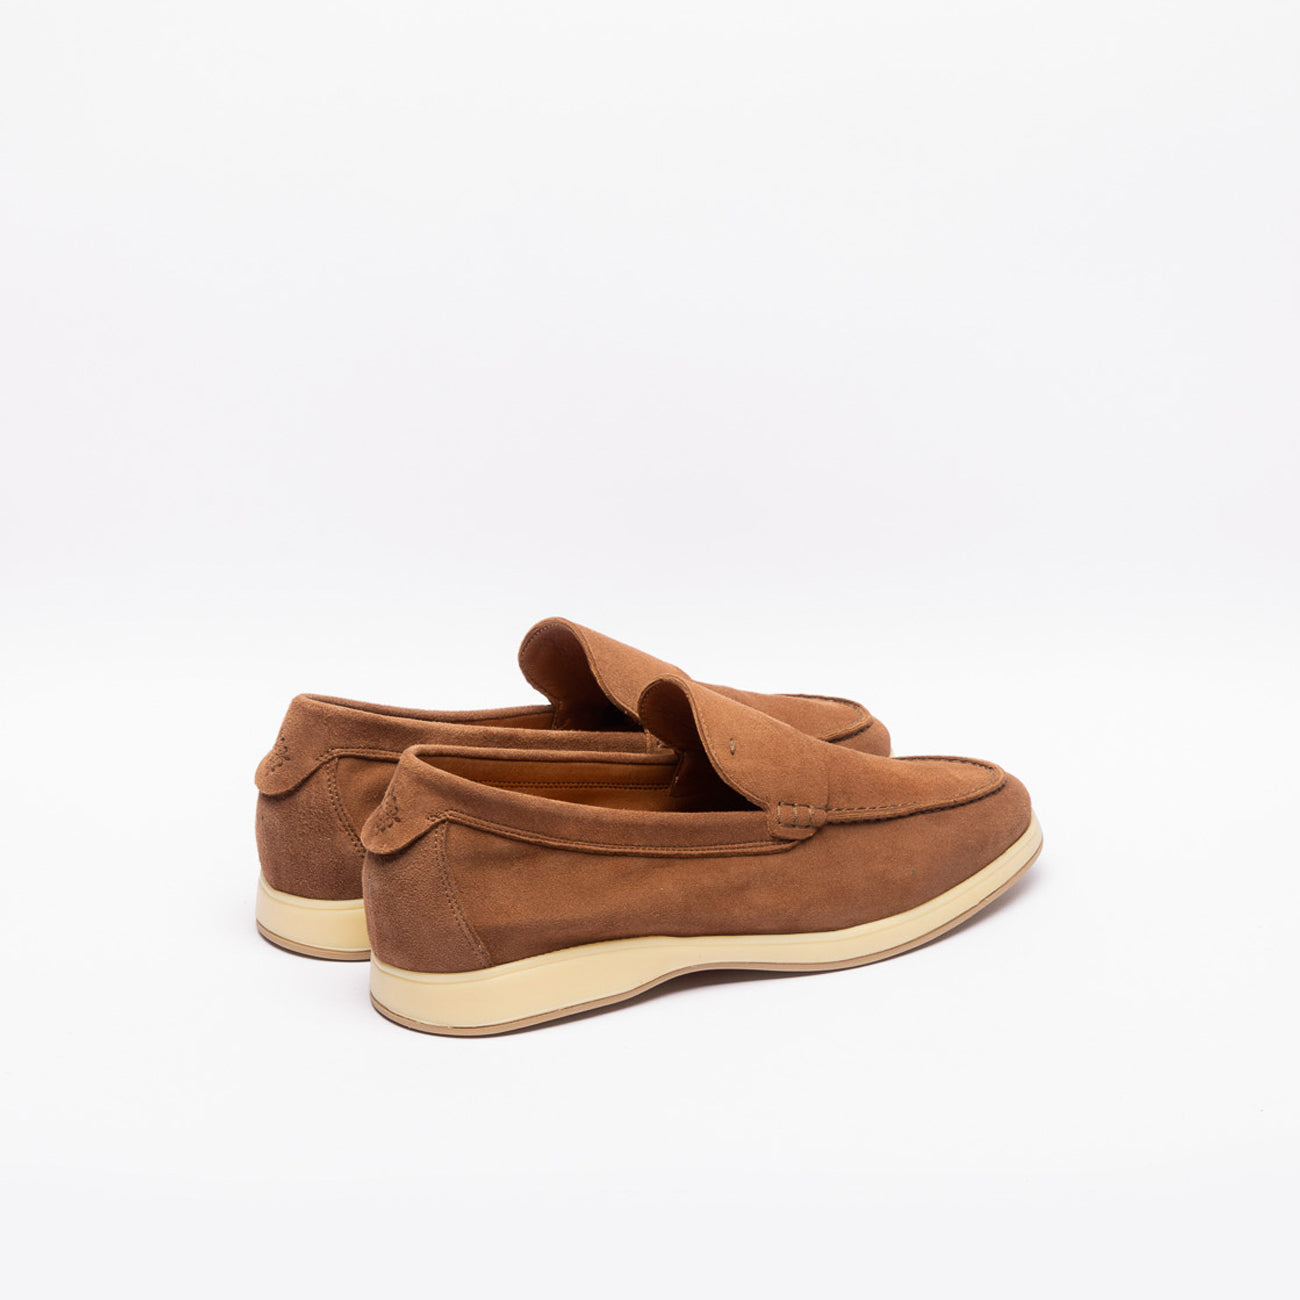 A. Ventura Aquariva 90 slip-on Sauvage brown suede loafer